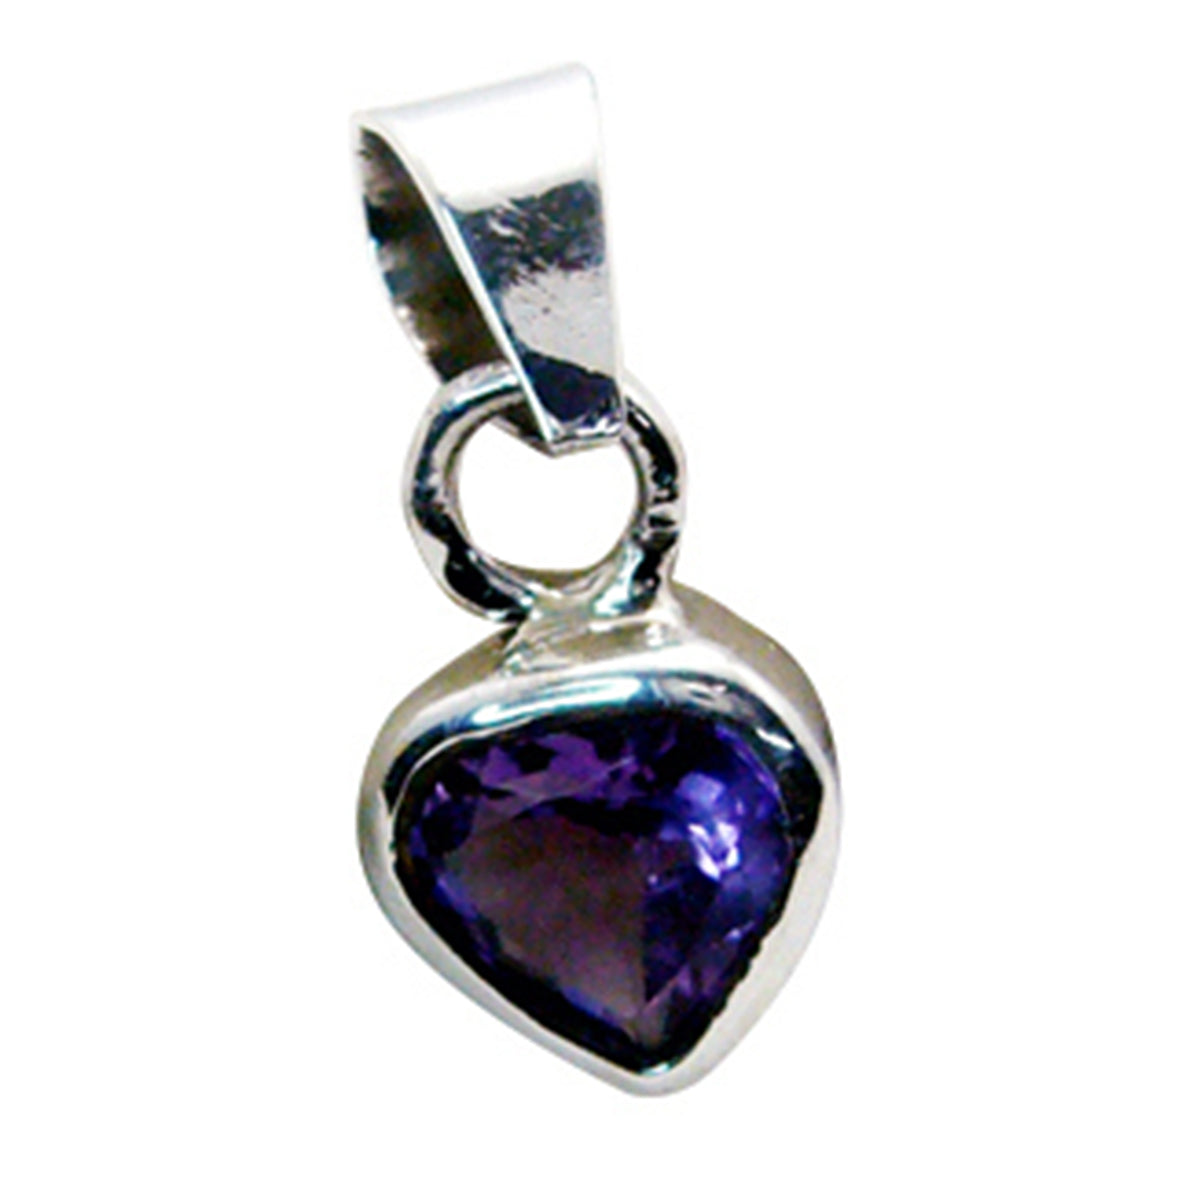 Riyo Real Gemstones Heart Faceted Purple Amethyst Sterling Silver Pendant gift for brithday